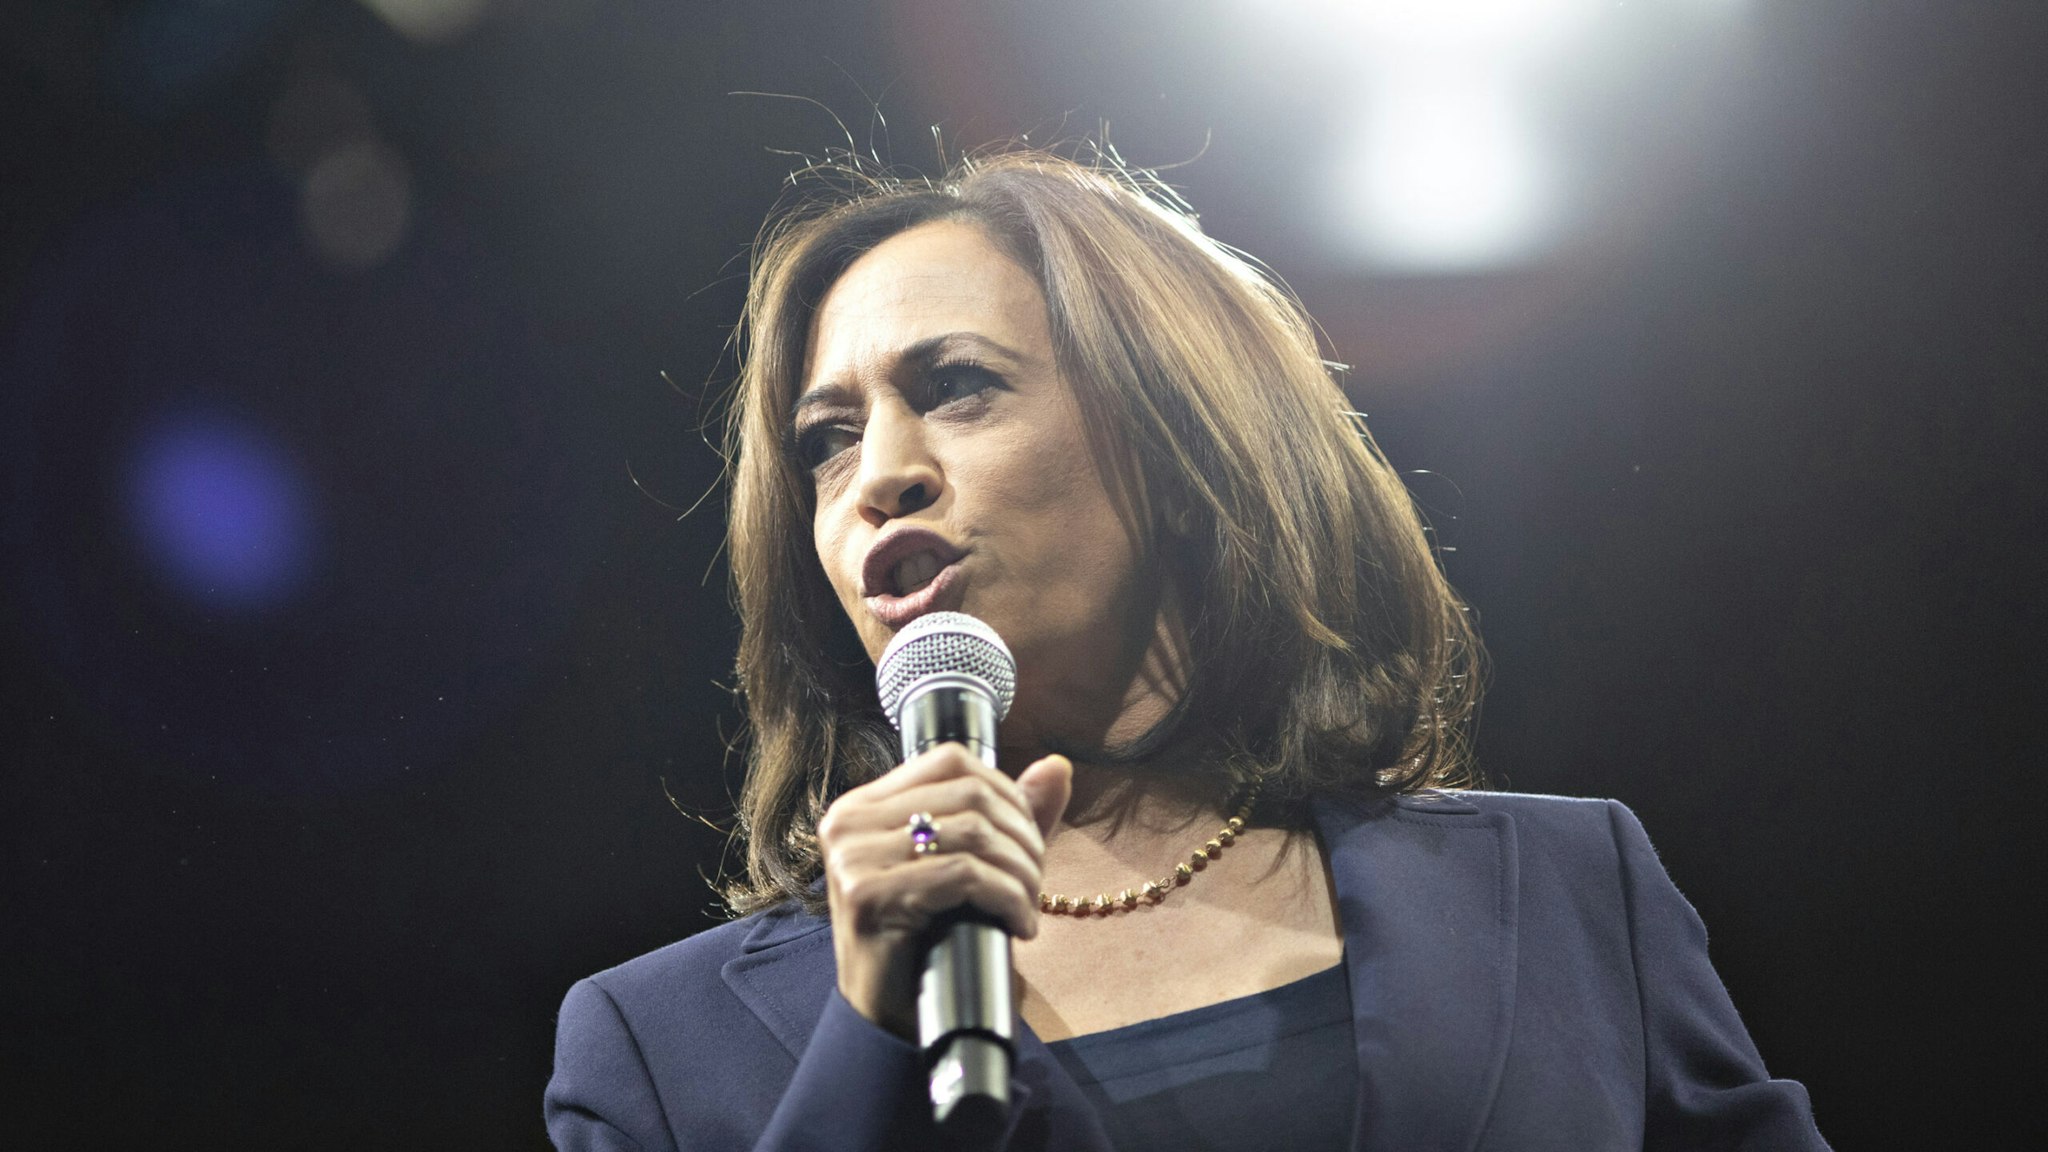 Senator Kamala Harris, a Democrat from California and 2020 presidential candidate, speaks during the Iowa Democratic Party Liberty &amp; Justice Dinner in Des Moines, Iowa, U.S., on Friday, Nov. 1, 2019. A New York Times/Siena College poll of Iowa Democrats released Friday showed the top four candidates Warren, Sanders, Buttigieg and Biden all bunched up in a five-point spread at the top of the field, within the poll's margin of error.